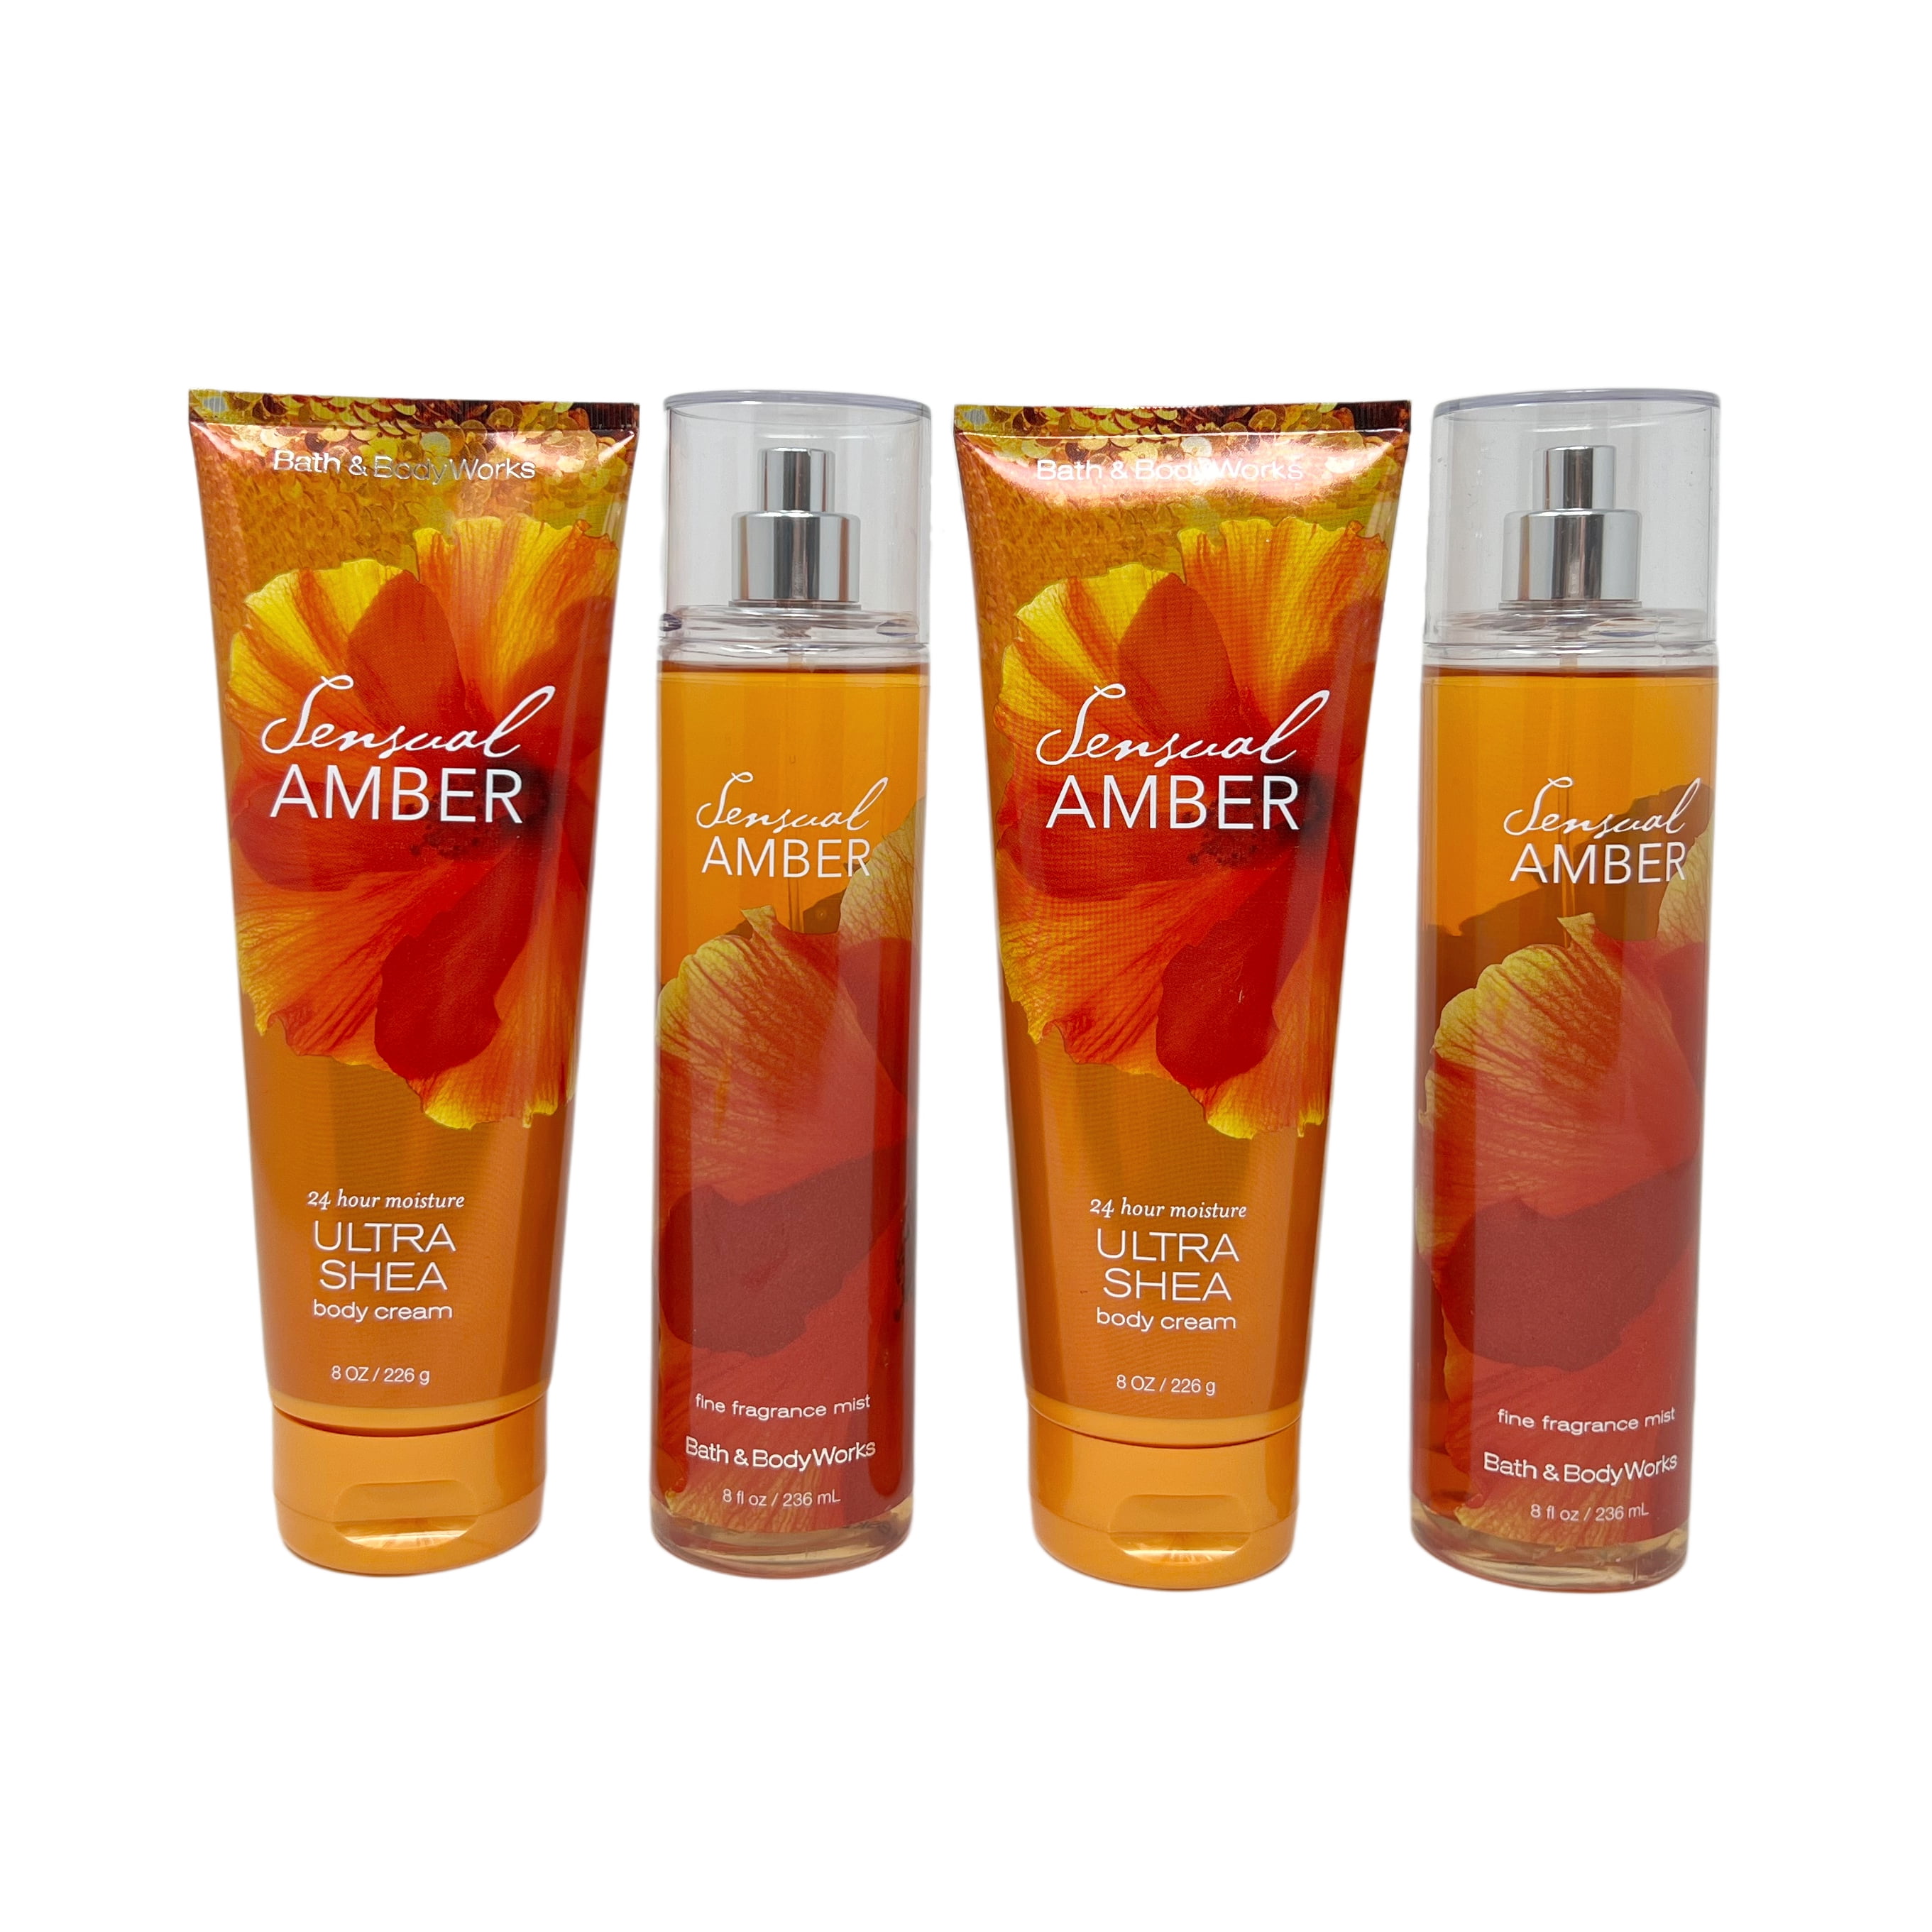 Bath and Body Works Sensual Amber Fine Fragrance Body Spray Mist Set -  Value Pack Lot of 2